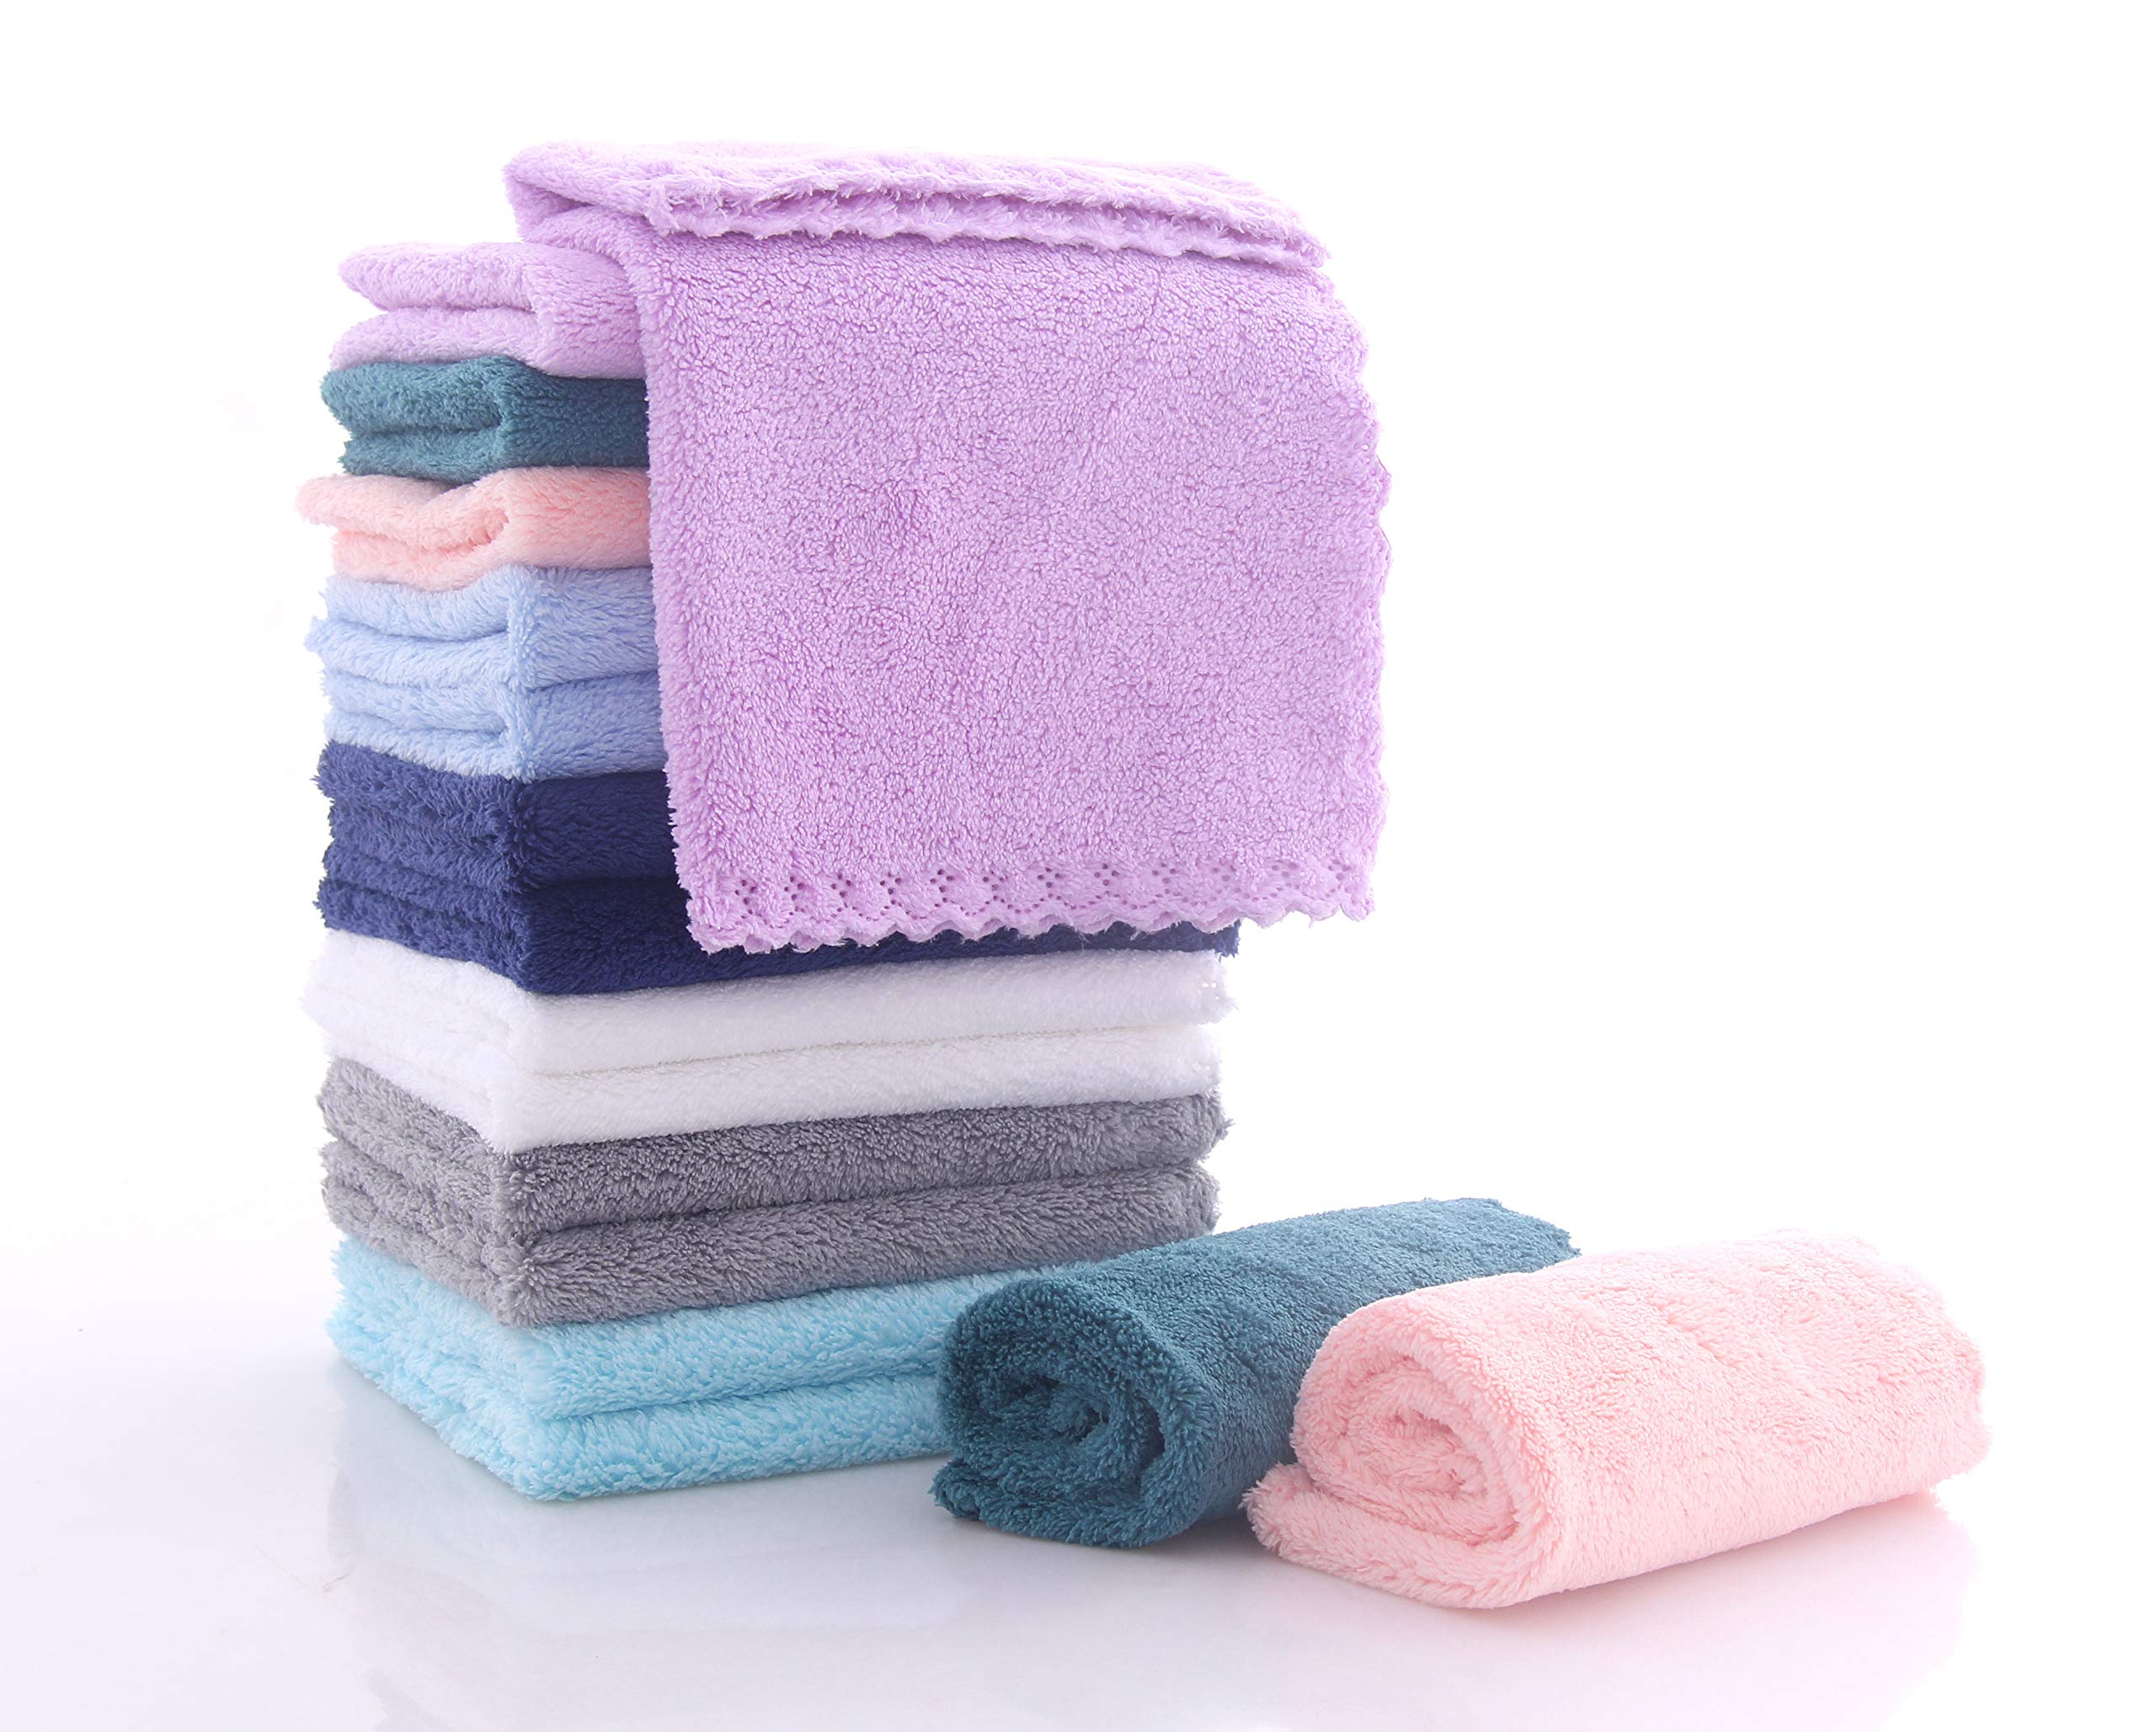 16 Pack Baby Washcloths - Luxury Multicolor Coral Fleece - Extra Absorbent and Soft Wash Clothes for Newborns, Infants and Toddlers - Suitable for Sensitive Skin and New Born - Baby Shower